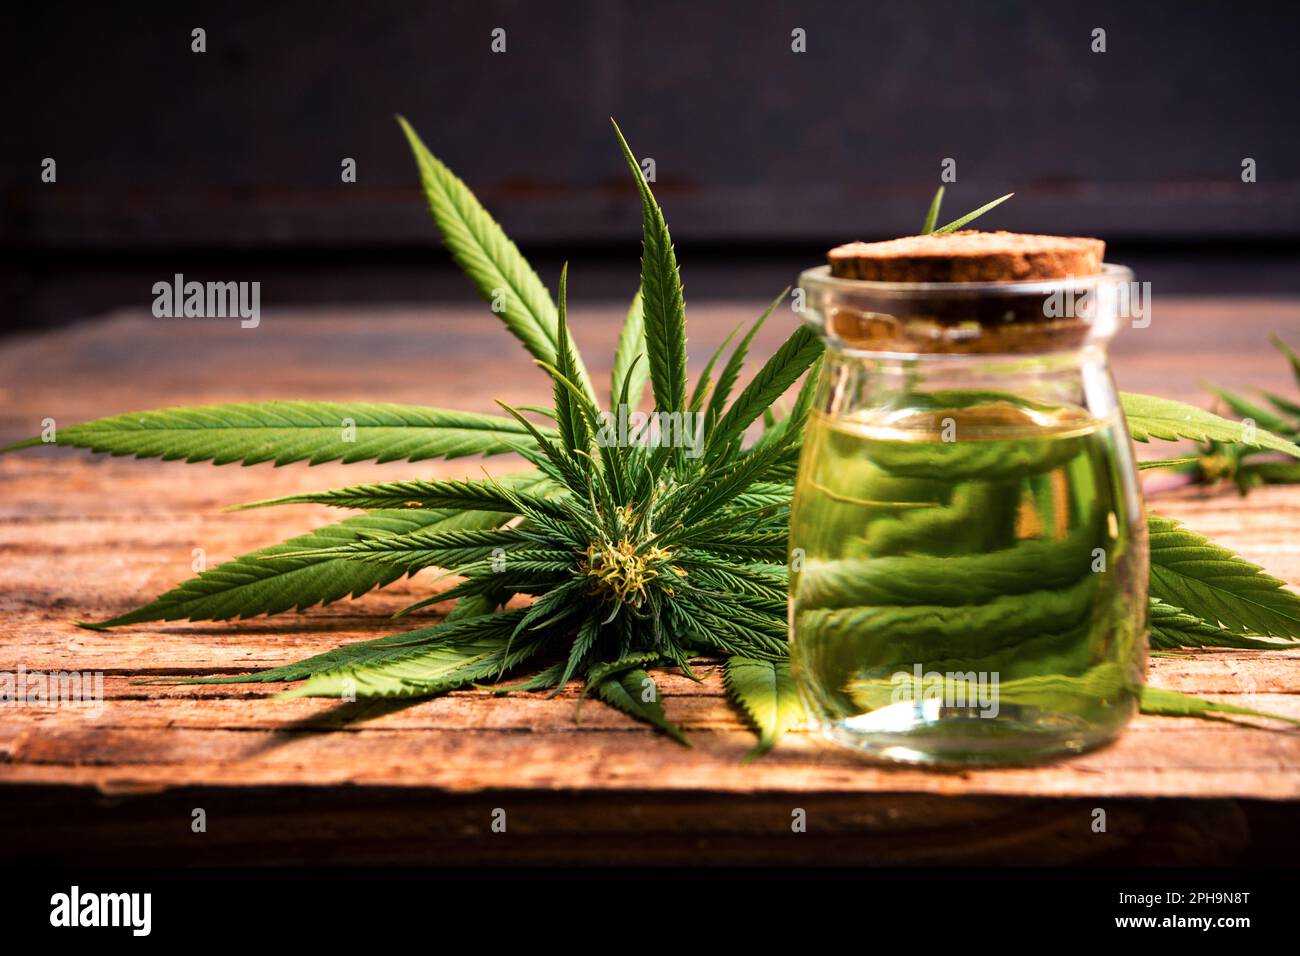 Marijuana plant with buds and essential oil on a wooden table Stock Photo